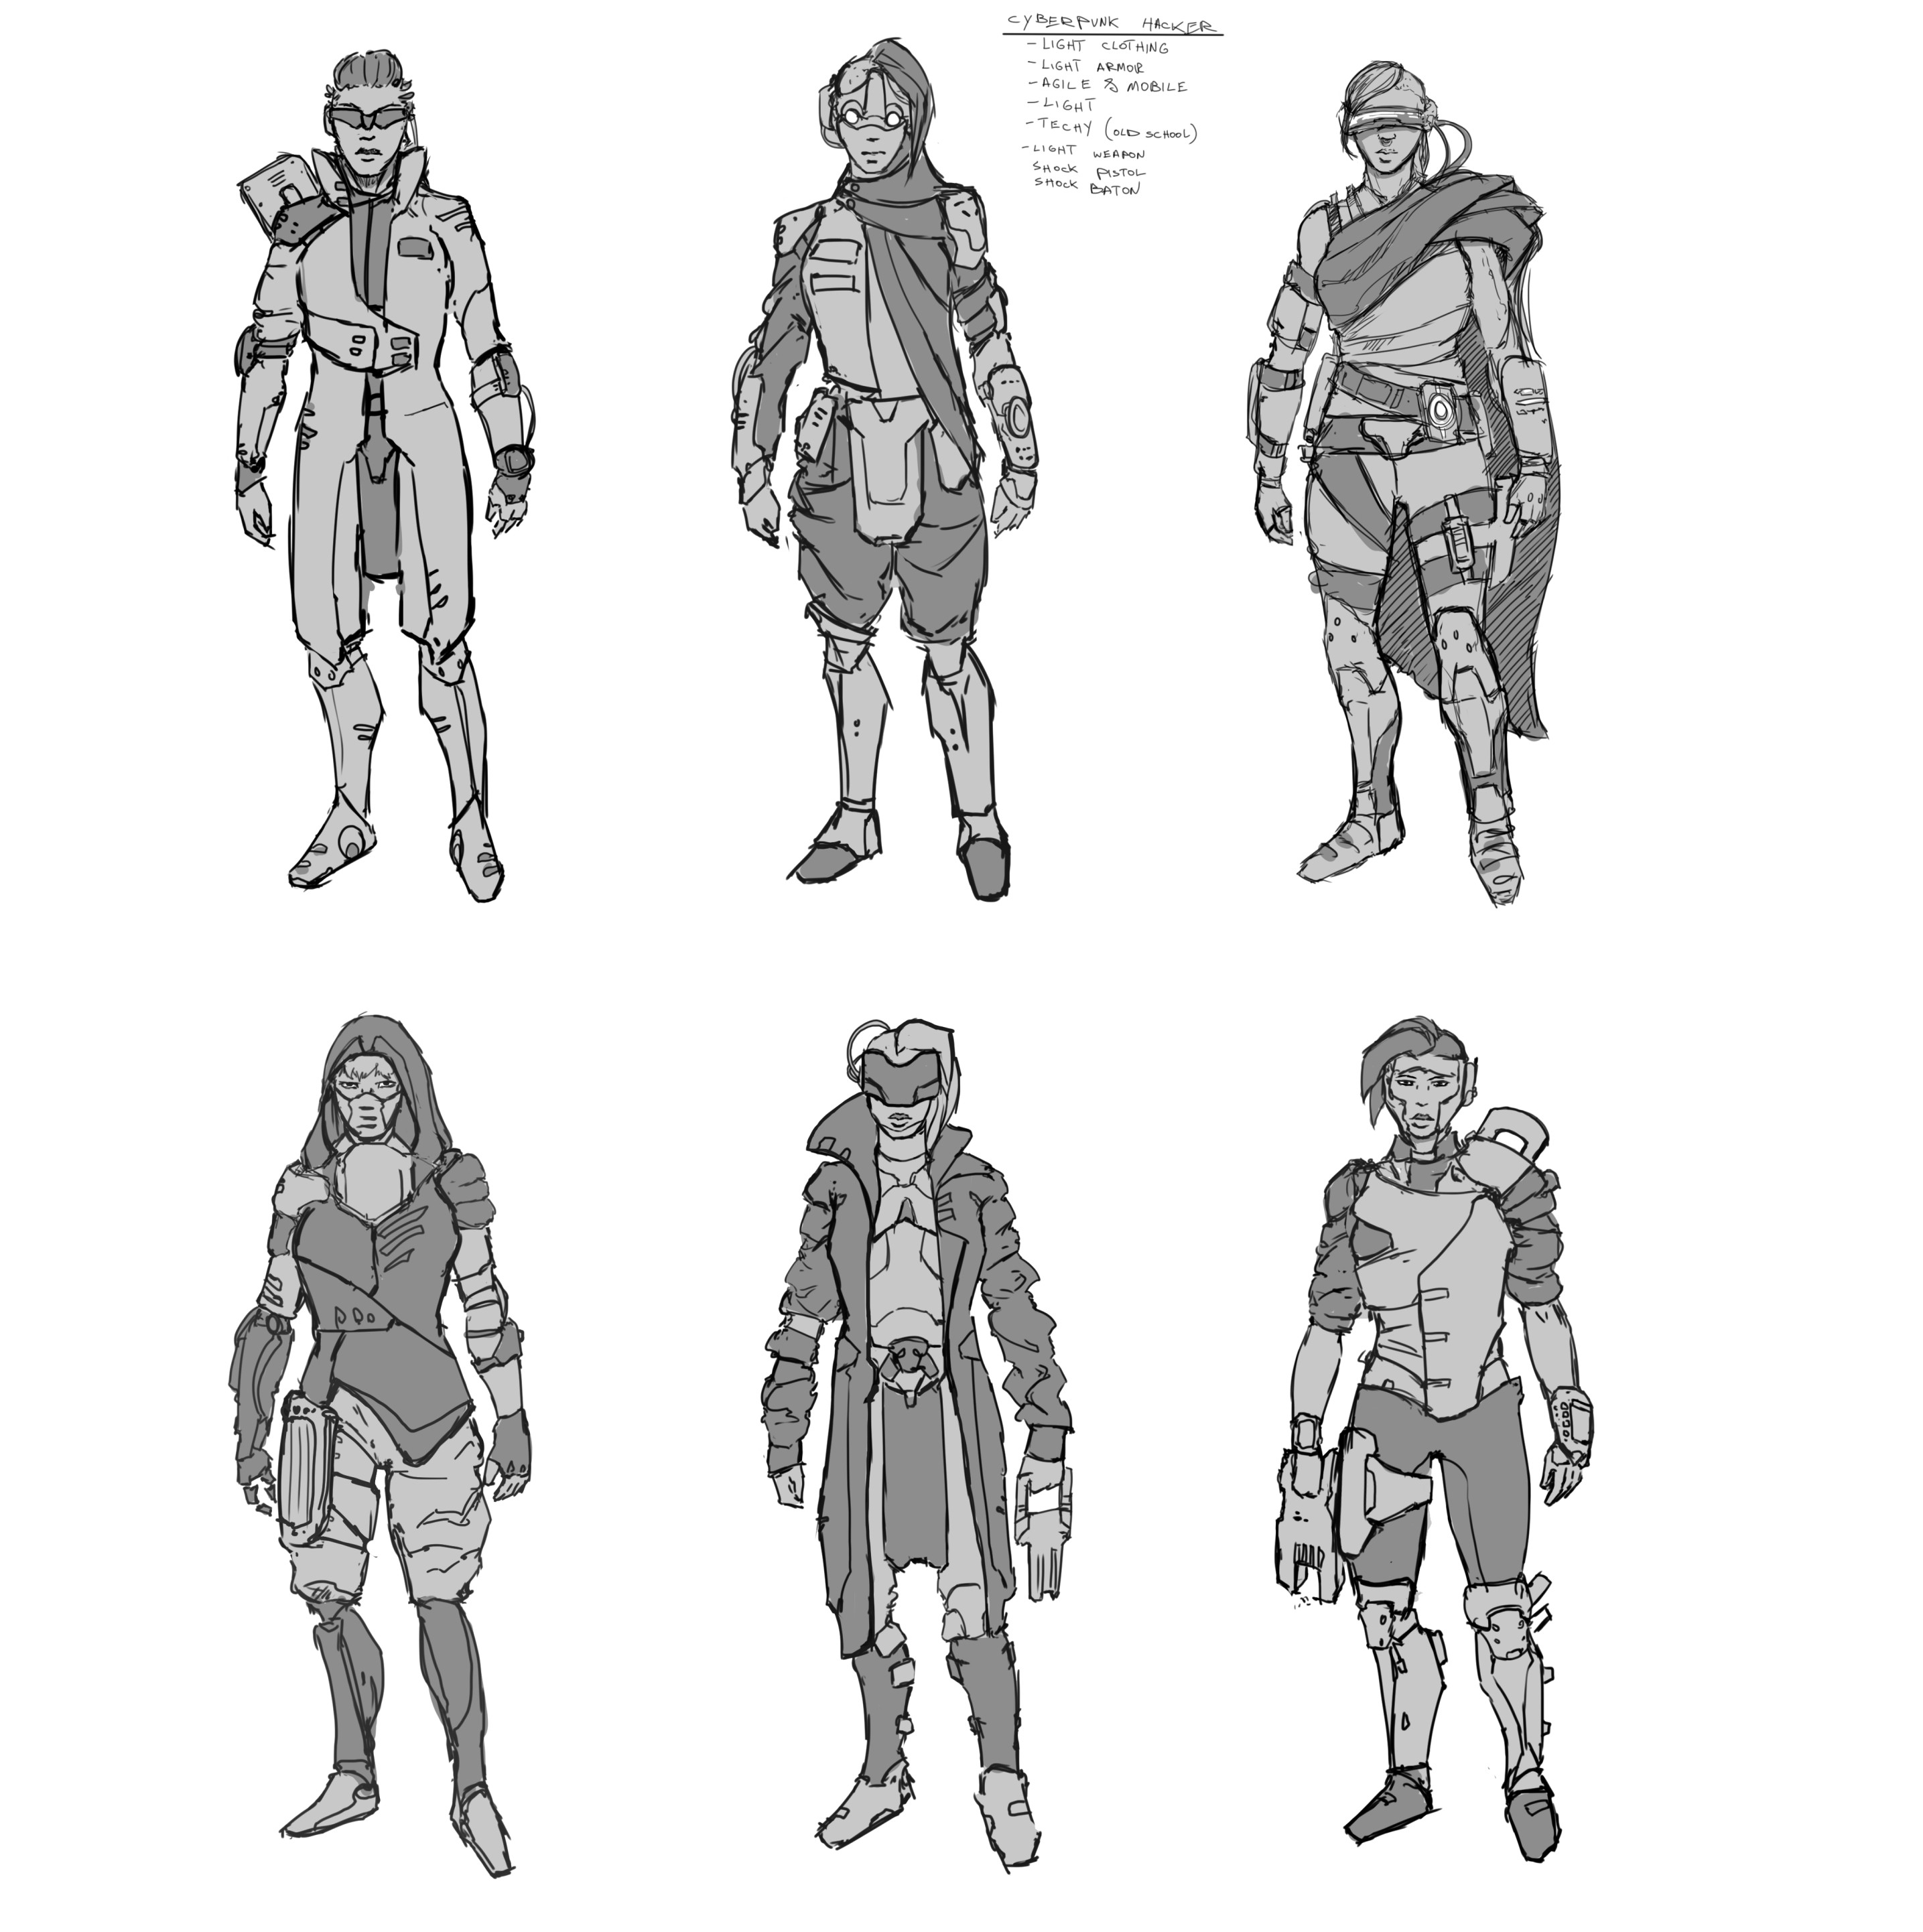 Thumbnail sketches to explore design and style of the character